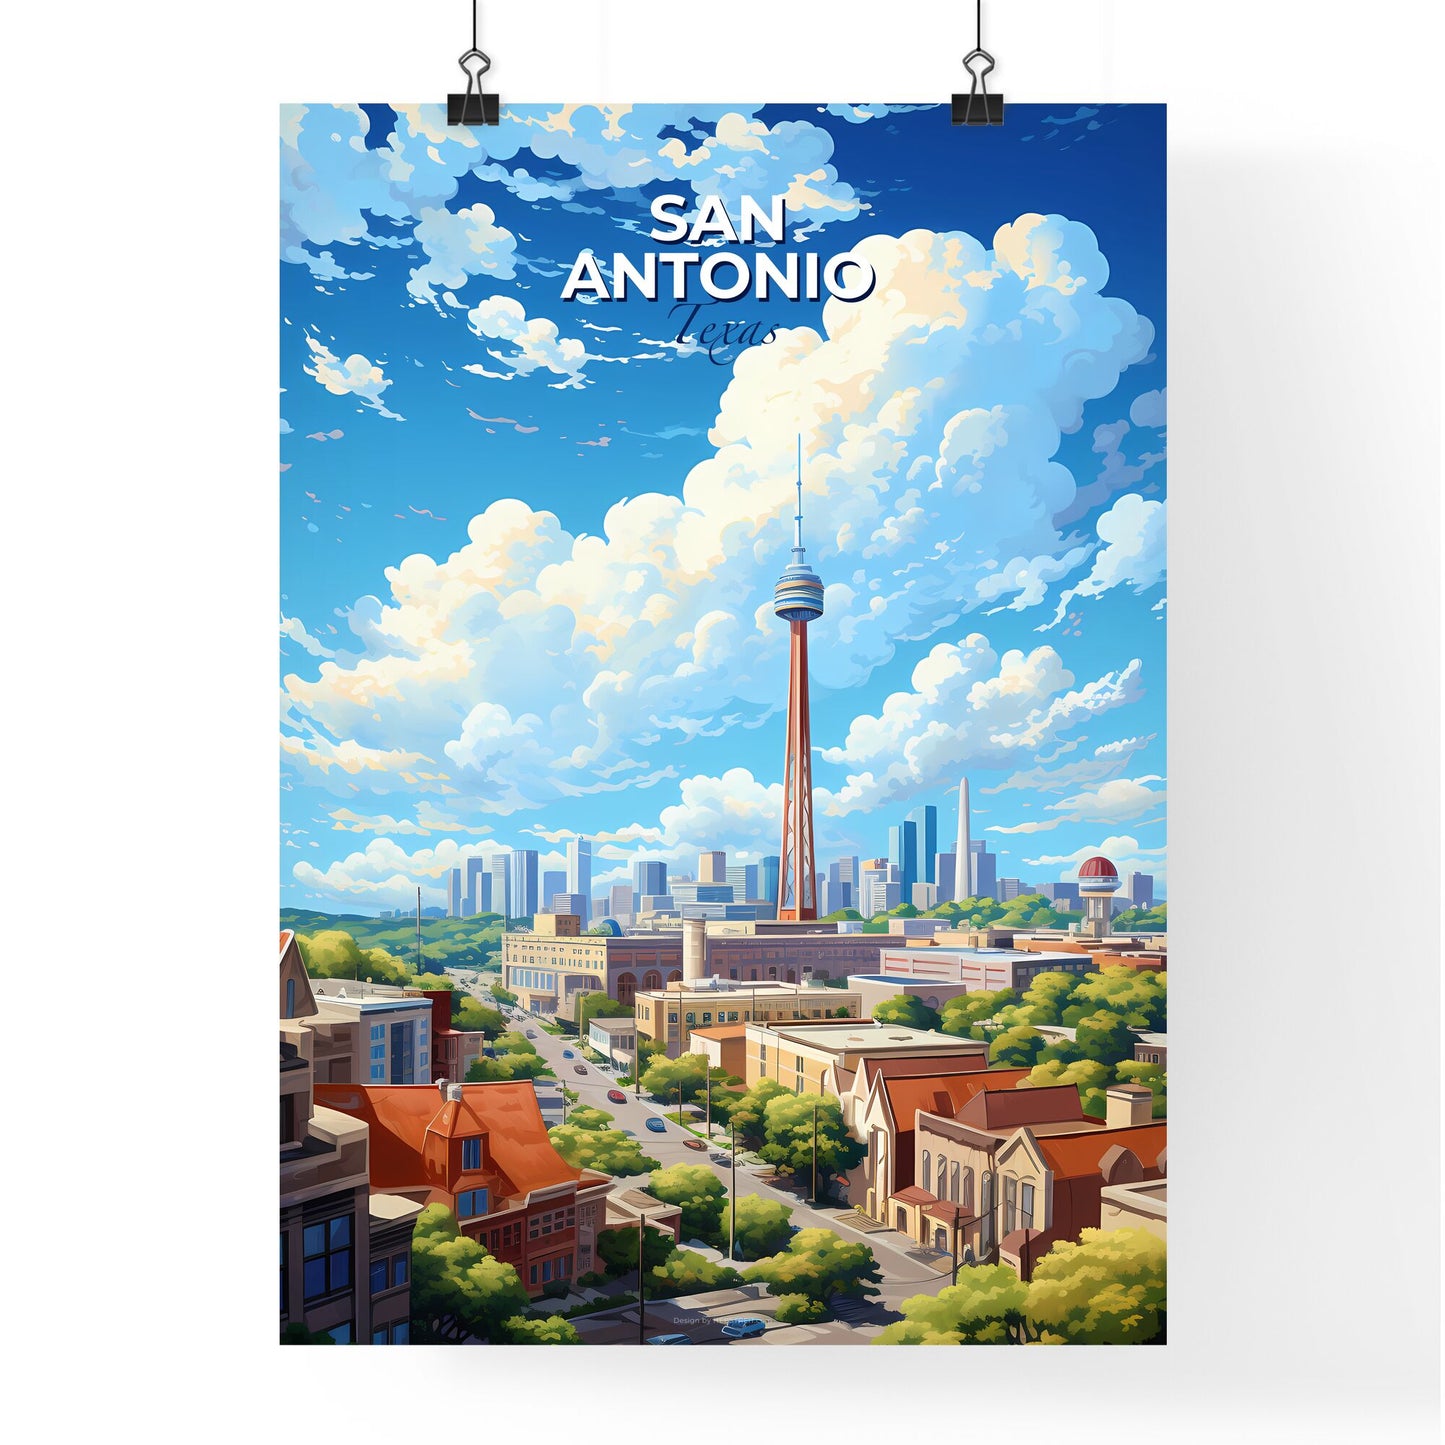 San Antonio Texas Skyline - A City With A Tower And Buildings - Customizable Travel Gift Default Title